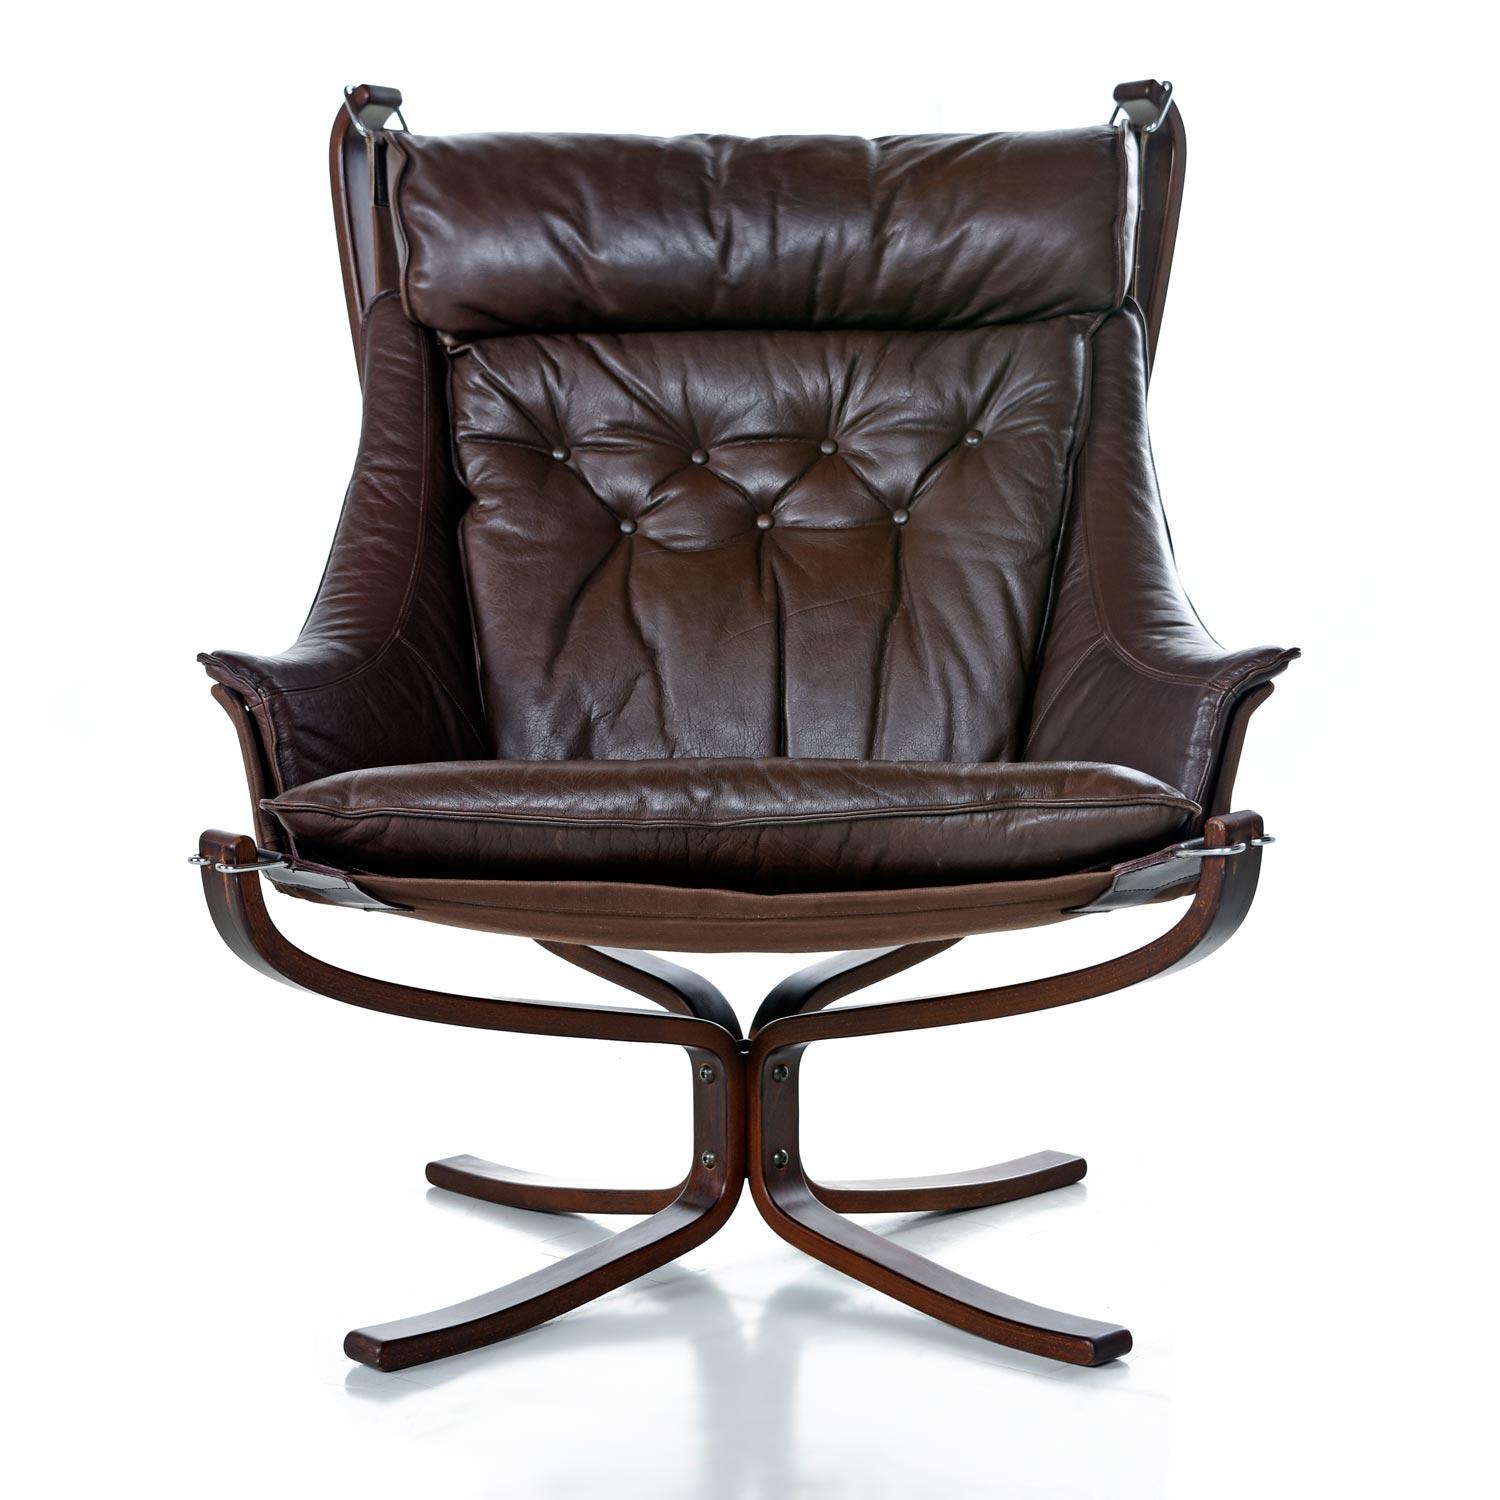 100% original falcon chair in excellent vintage condition. This rare model features a headrest, armrests and rosewood frame, three hard to find upgrades.

Designed by Sigurd Resell for Norwegian manufacturer, Vatne Møbler. Ingenious design